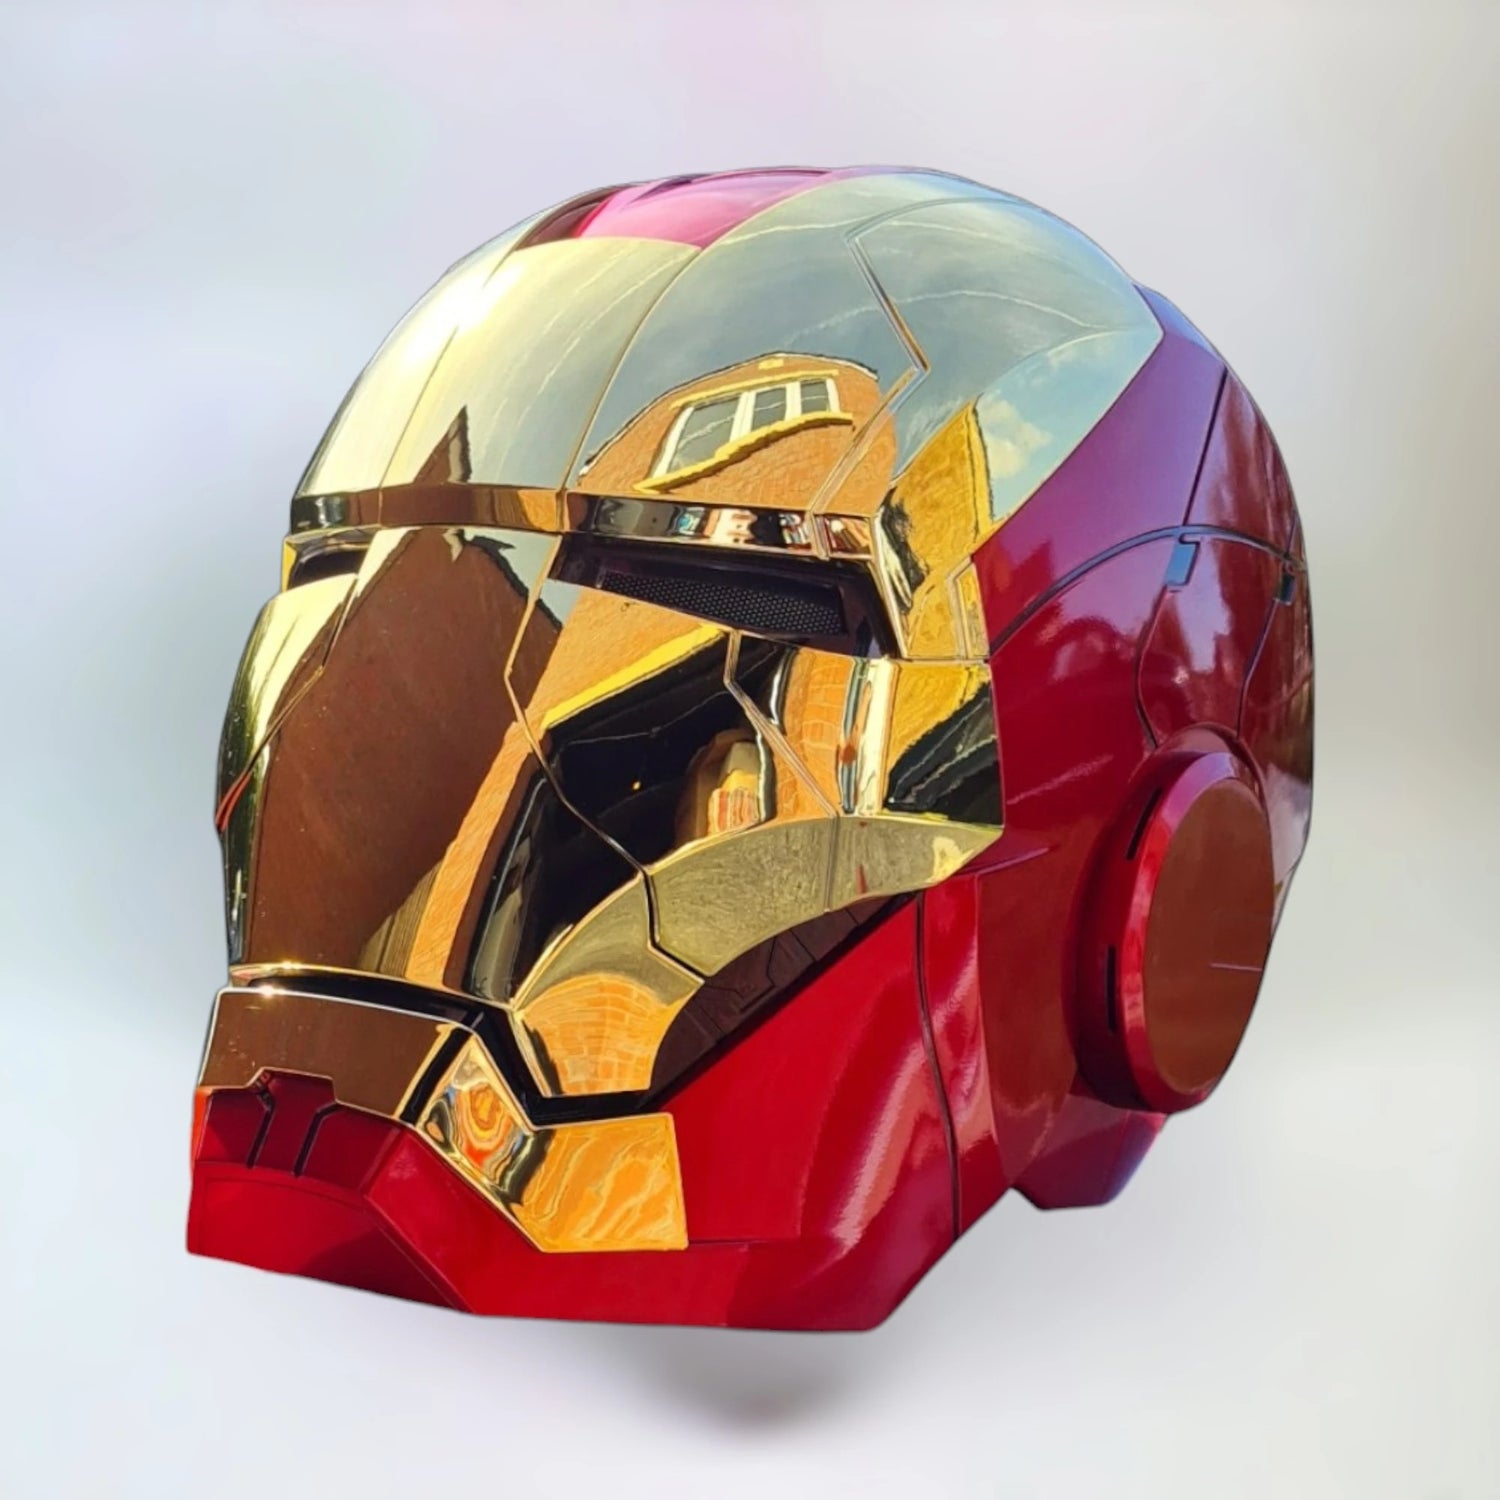 Iron Man MK5 helmet gold edition on a plain white background, part of The Iron Man MK5 Series collectibles